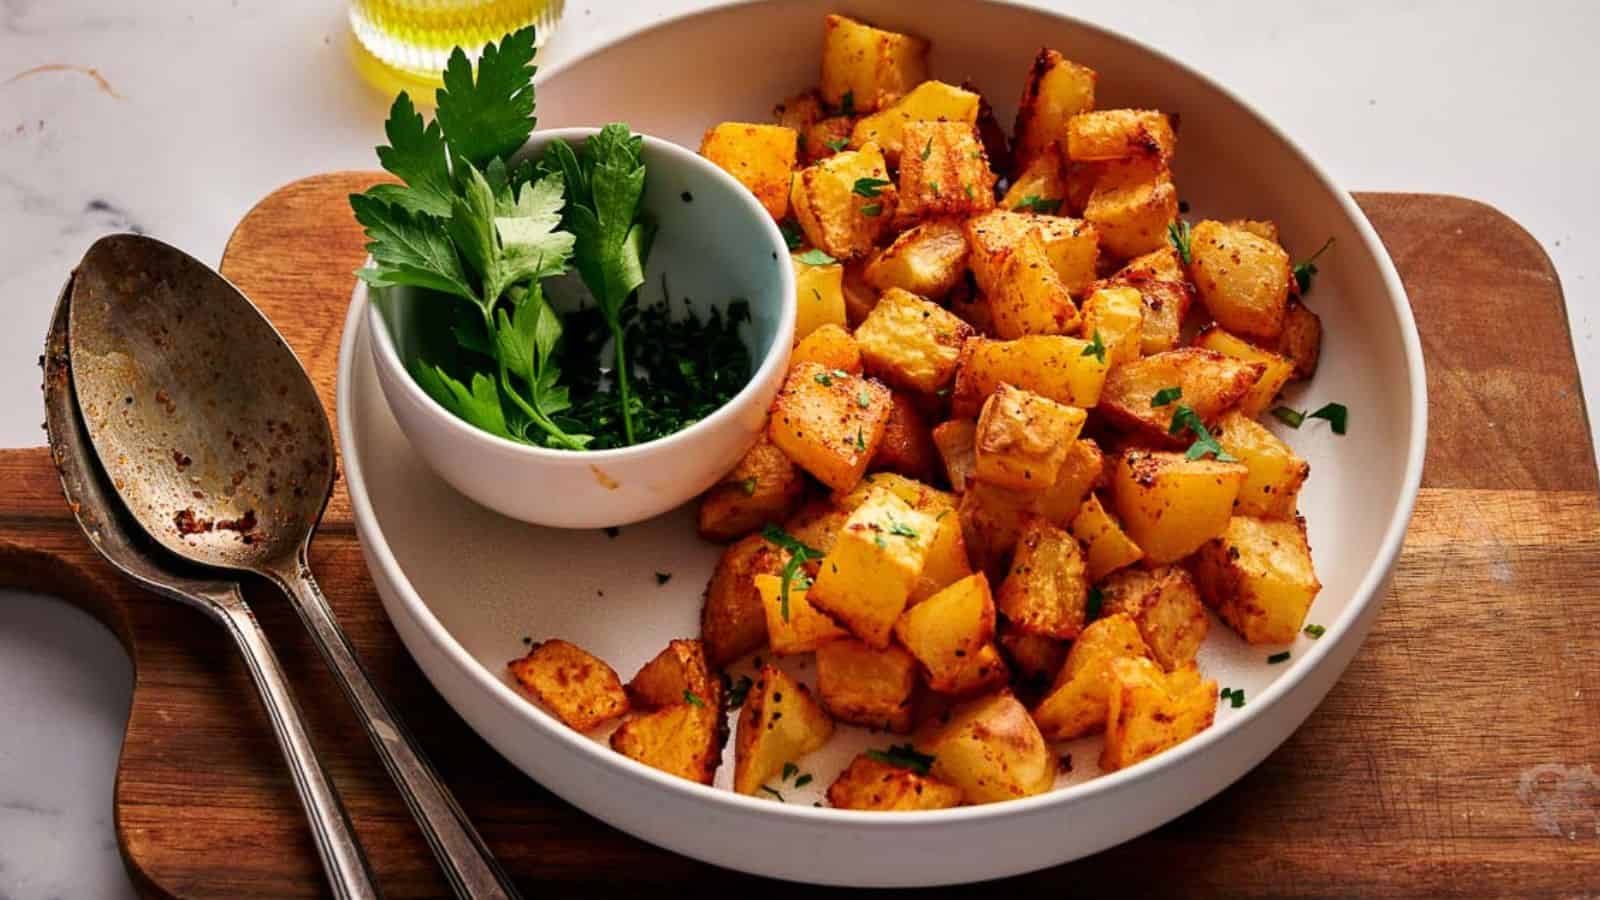 <p>Crispy on the outside, and tender on the inside – these breakfast potatoes are a morning delight. The pleasing crunch adds a perfect texture to your breakfast routine. Simple yet deeply pleasurable, they complement other breakfast staples seamlessly, making your morning meal complete.<br><strong>Get the Recipe: </strong><a href="https://www.splashoftaste.com/breakfast-potatoes/?utm_source=msn&utm_medium=page&utm_campaign=msn">Breakfast Potatoes</a></p>